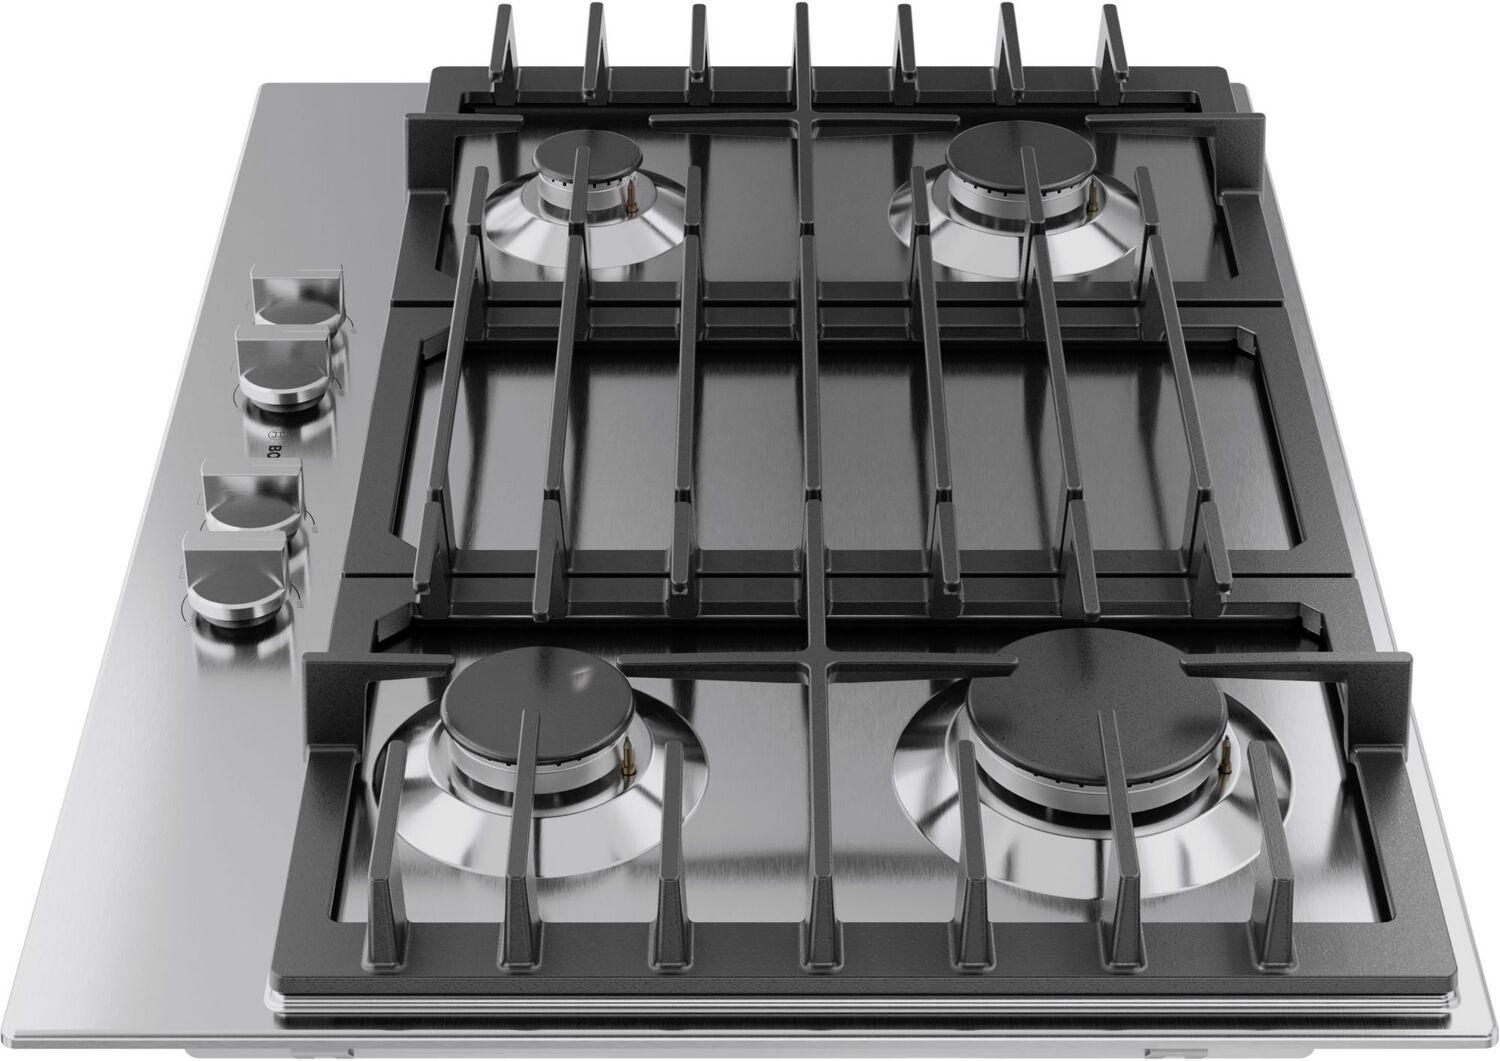 Bosch 300 Series Gas Cooktop 30" Stainless steel NGM3051UC